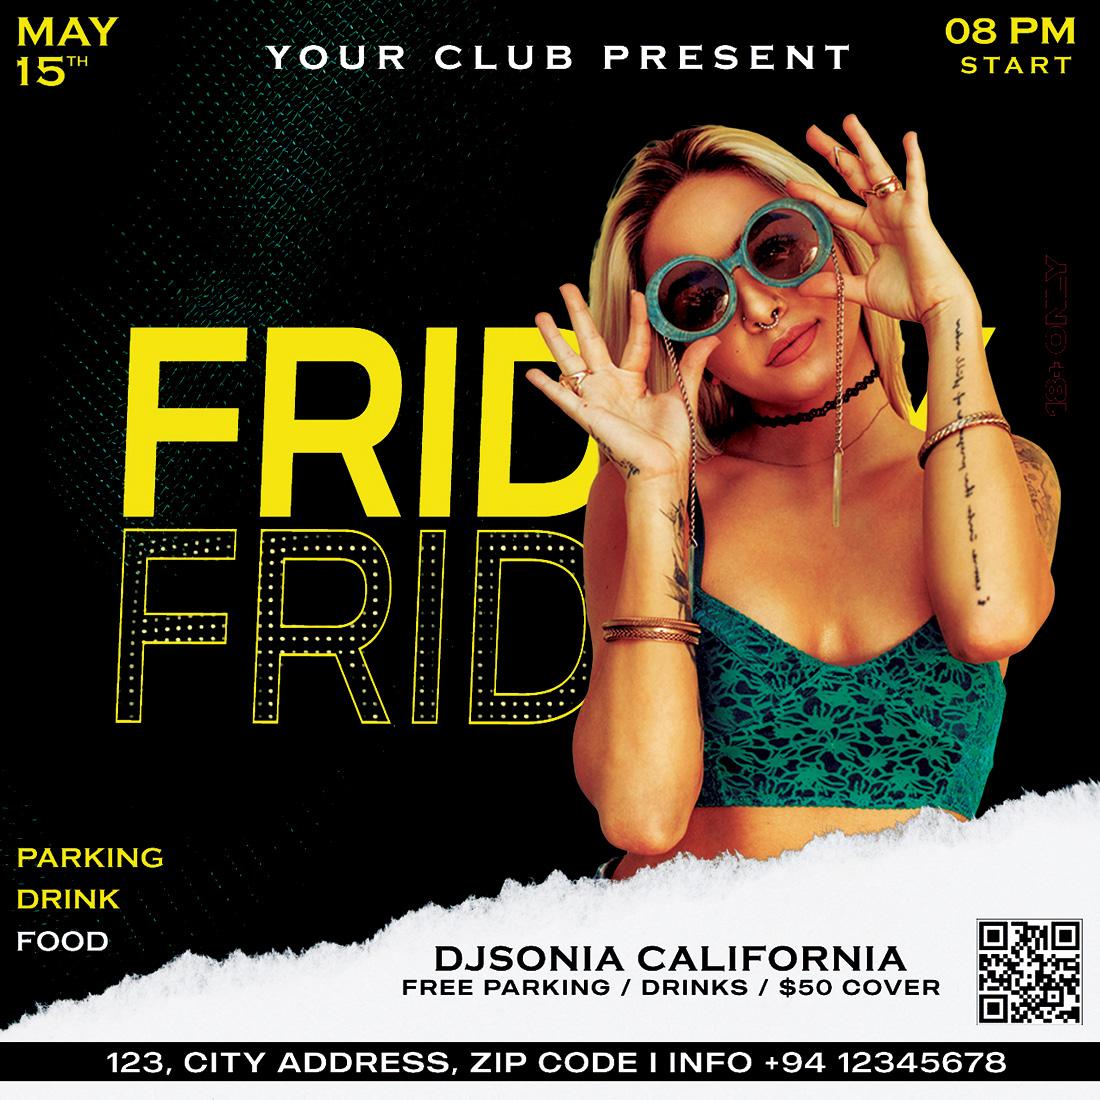 Amazing Night Club Flyer Templates cover image.